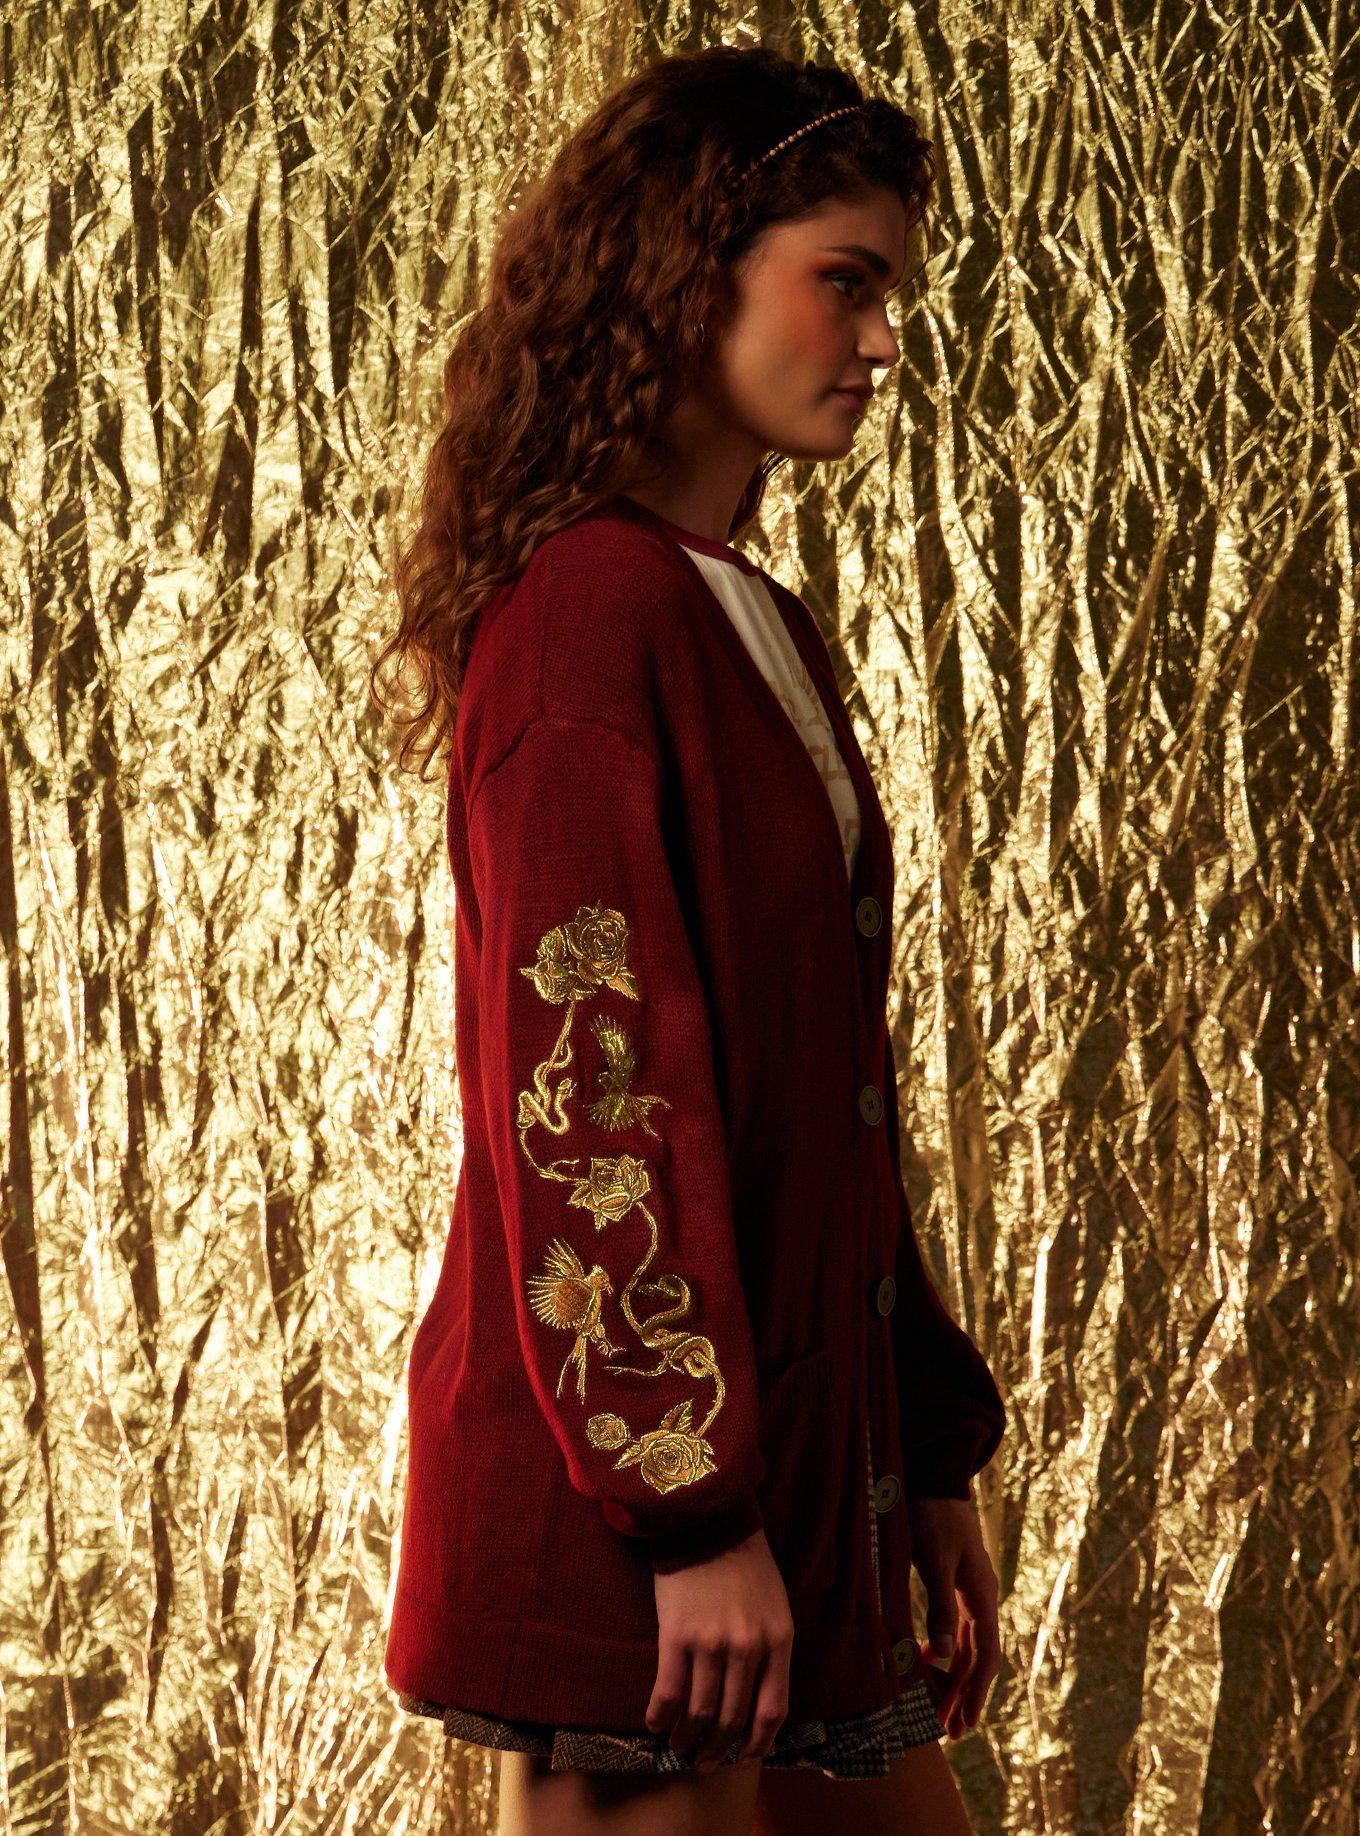 The Hunger Games: Ballad Of Songbirds & Snakes Girls Embroidered Cardigan